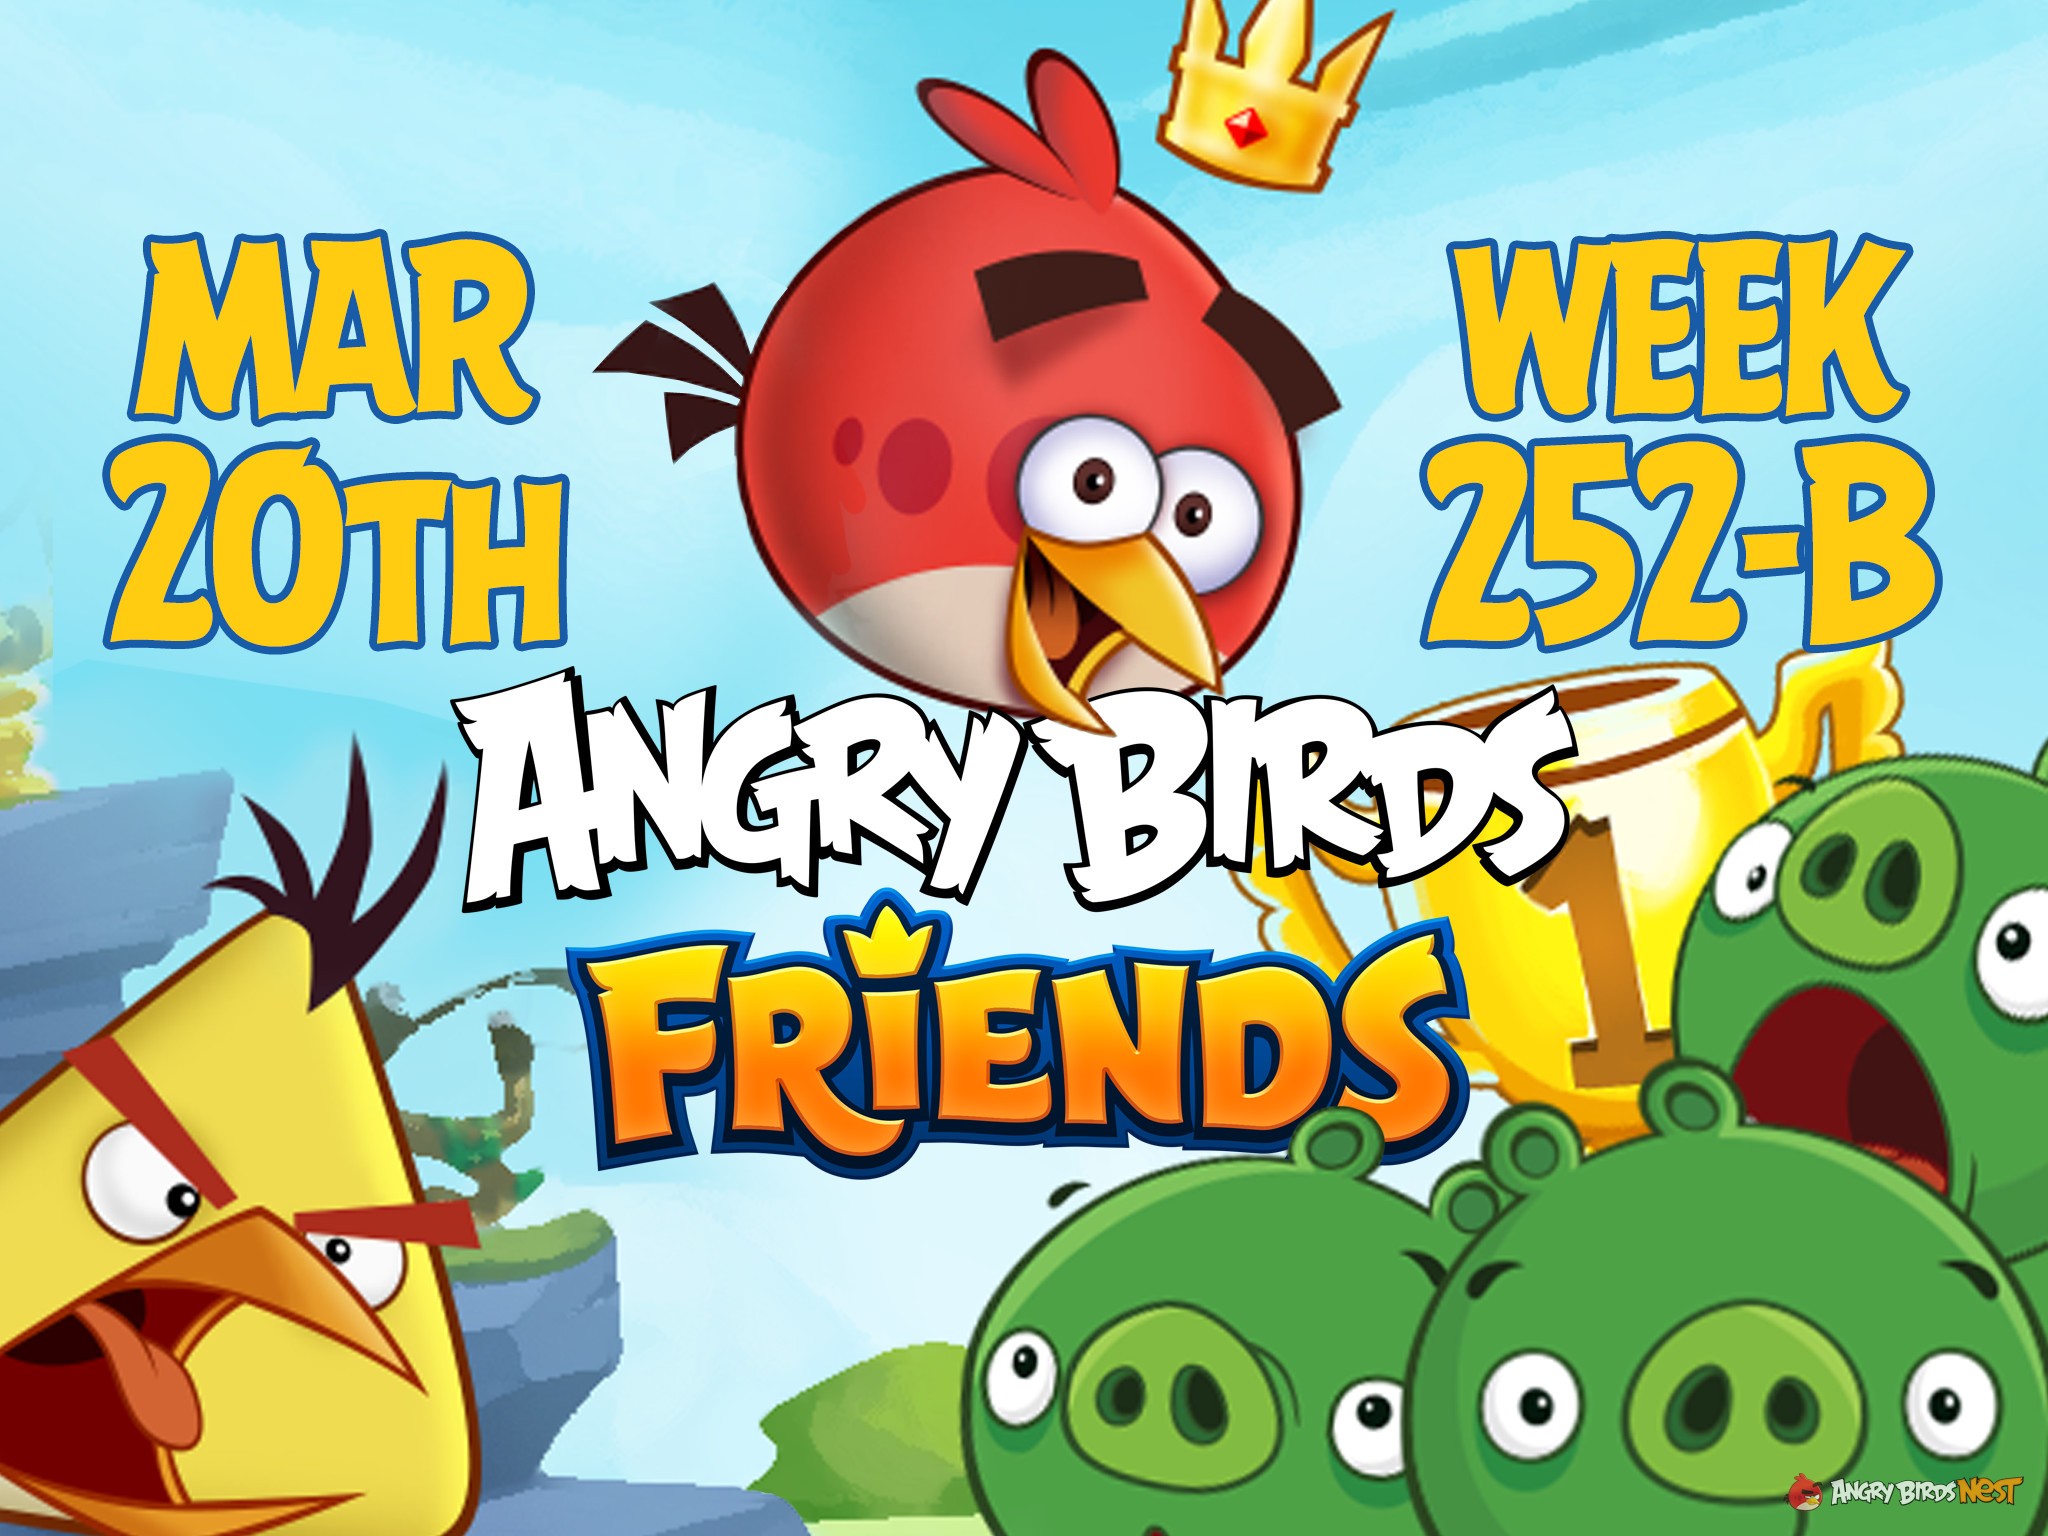 Angry Birds Friends Tournament Week 252-B Feature Image